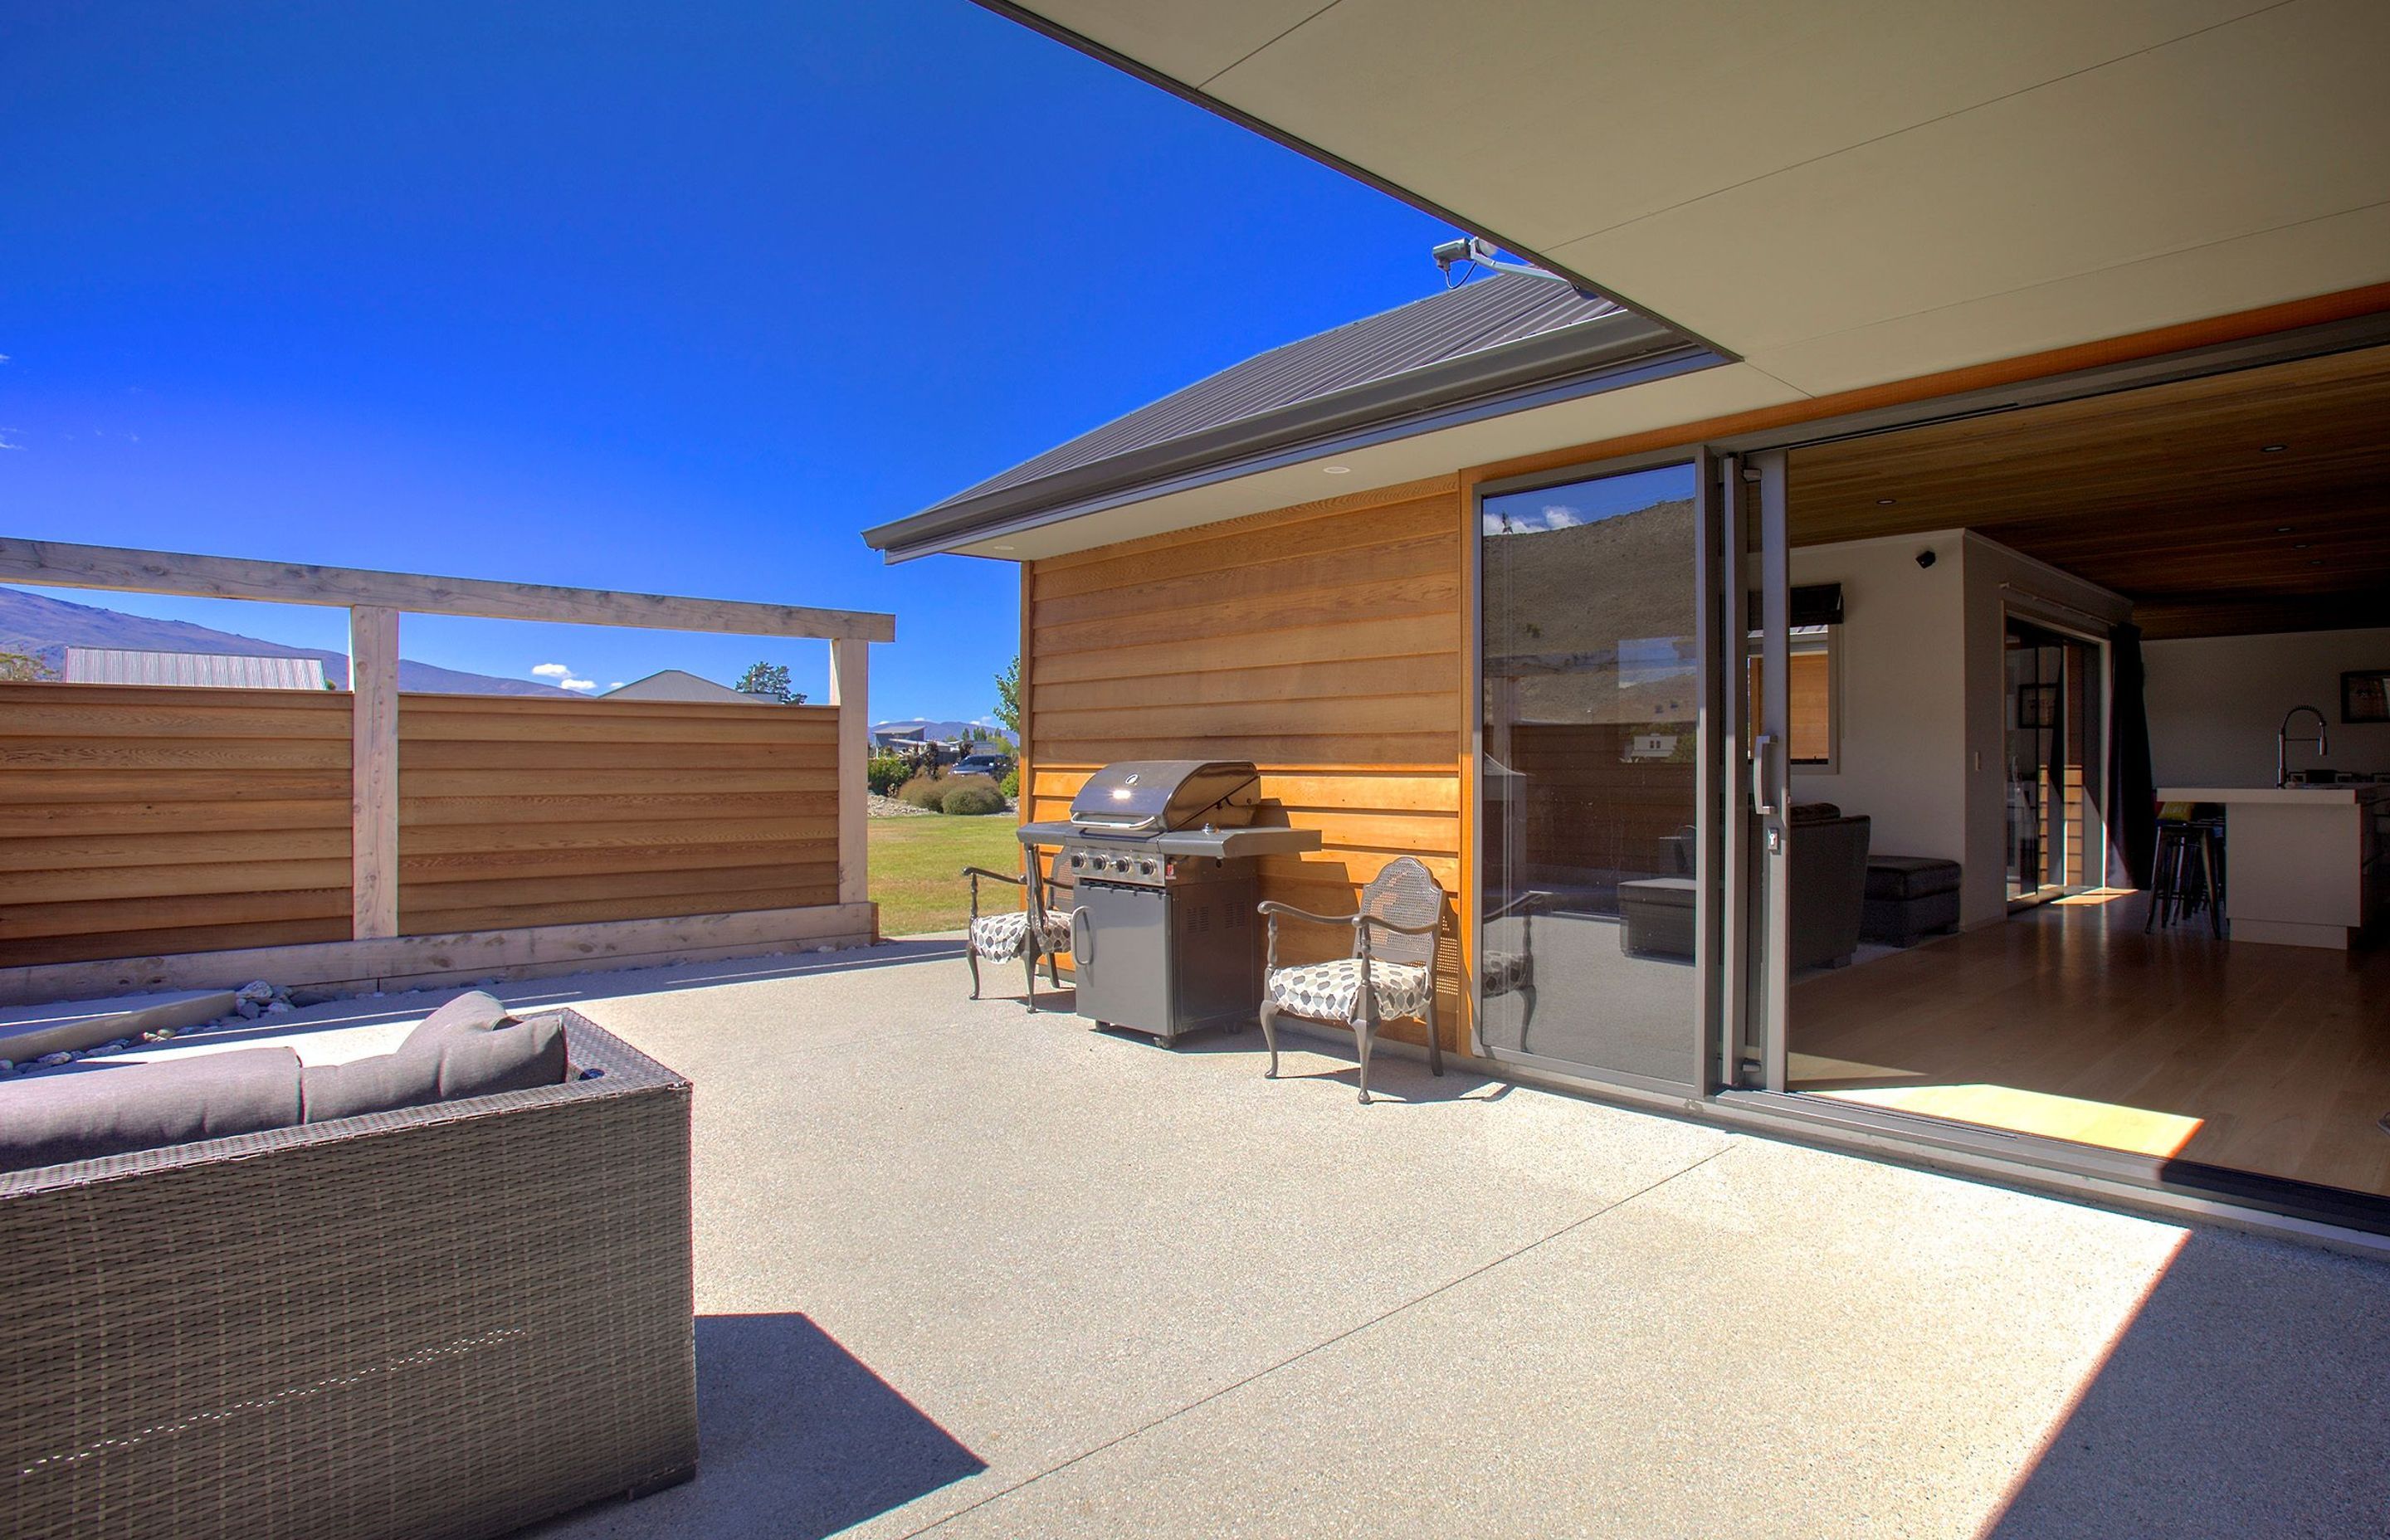 Project Timber: July 2020 - Central Otago House